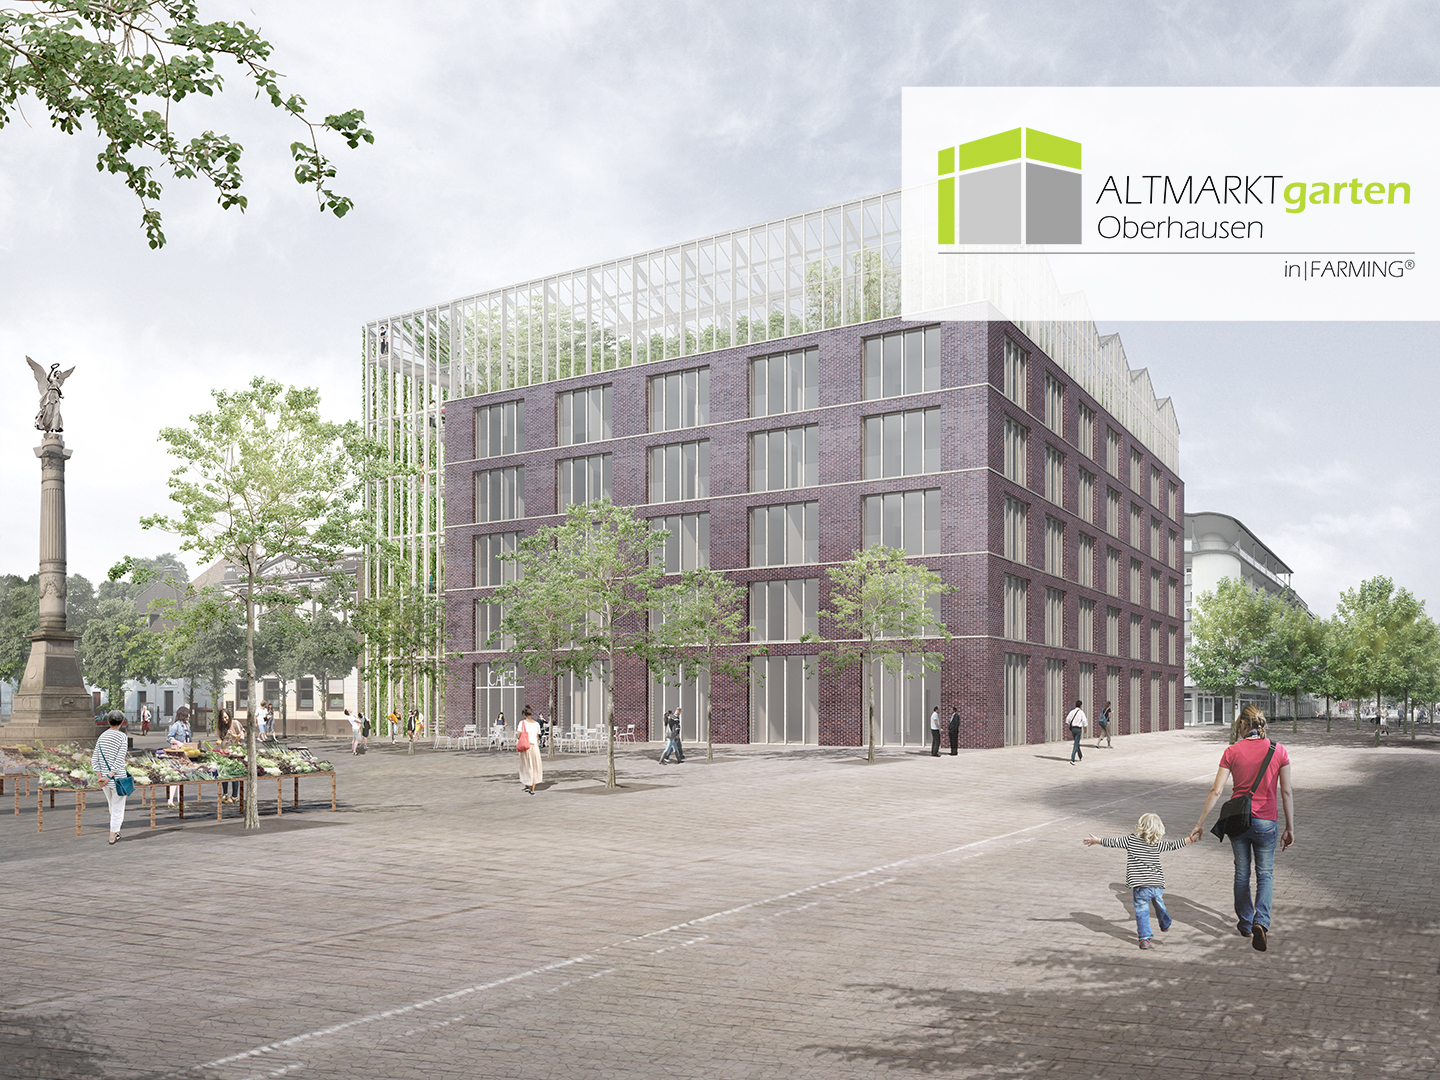 The “ALTMARKTgarten” is the first  “inFARMING®” concept in Germany. 